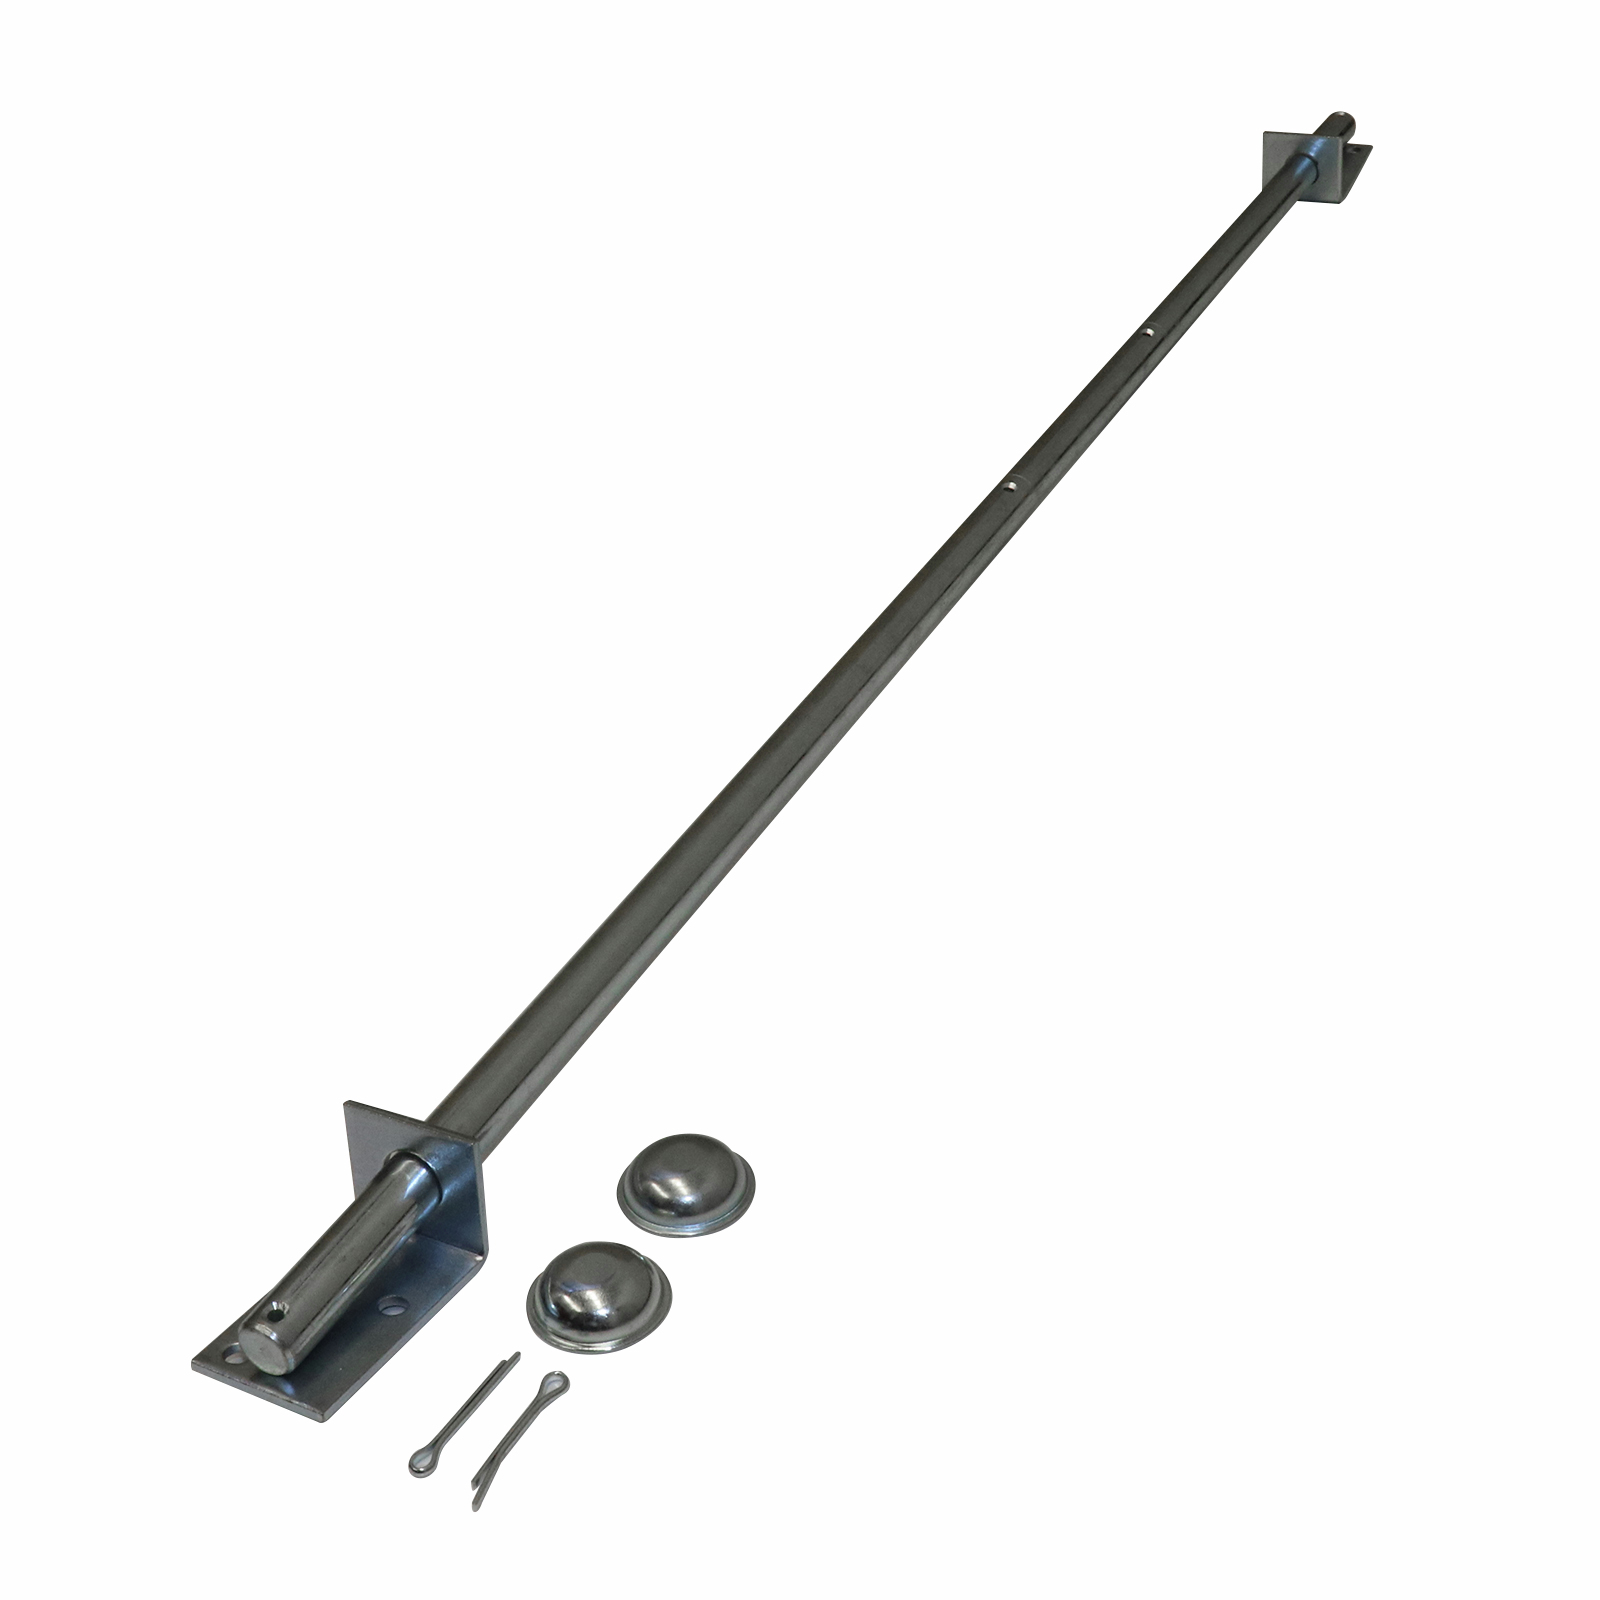 Move It 450 - 600mm 3/8" Adjustable Axle With Cap